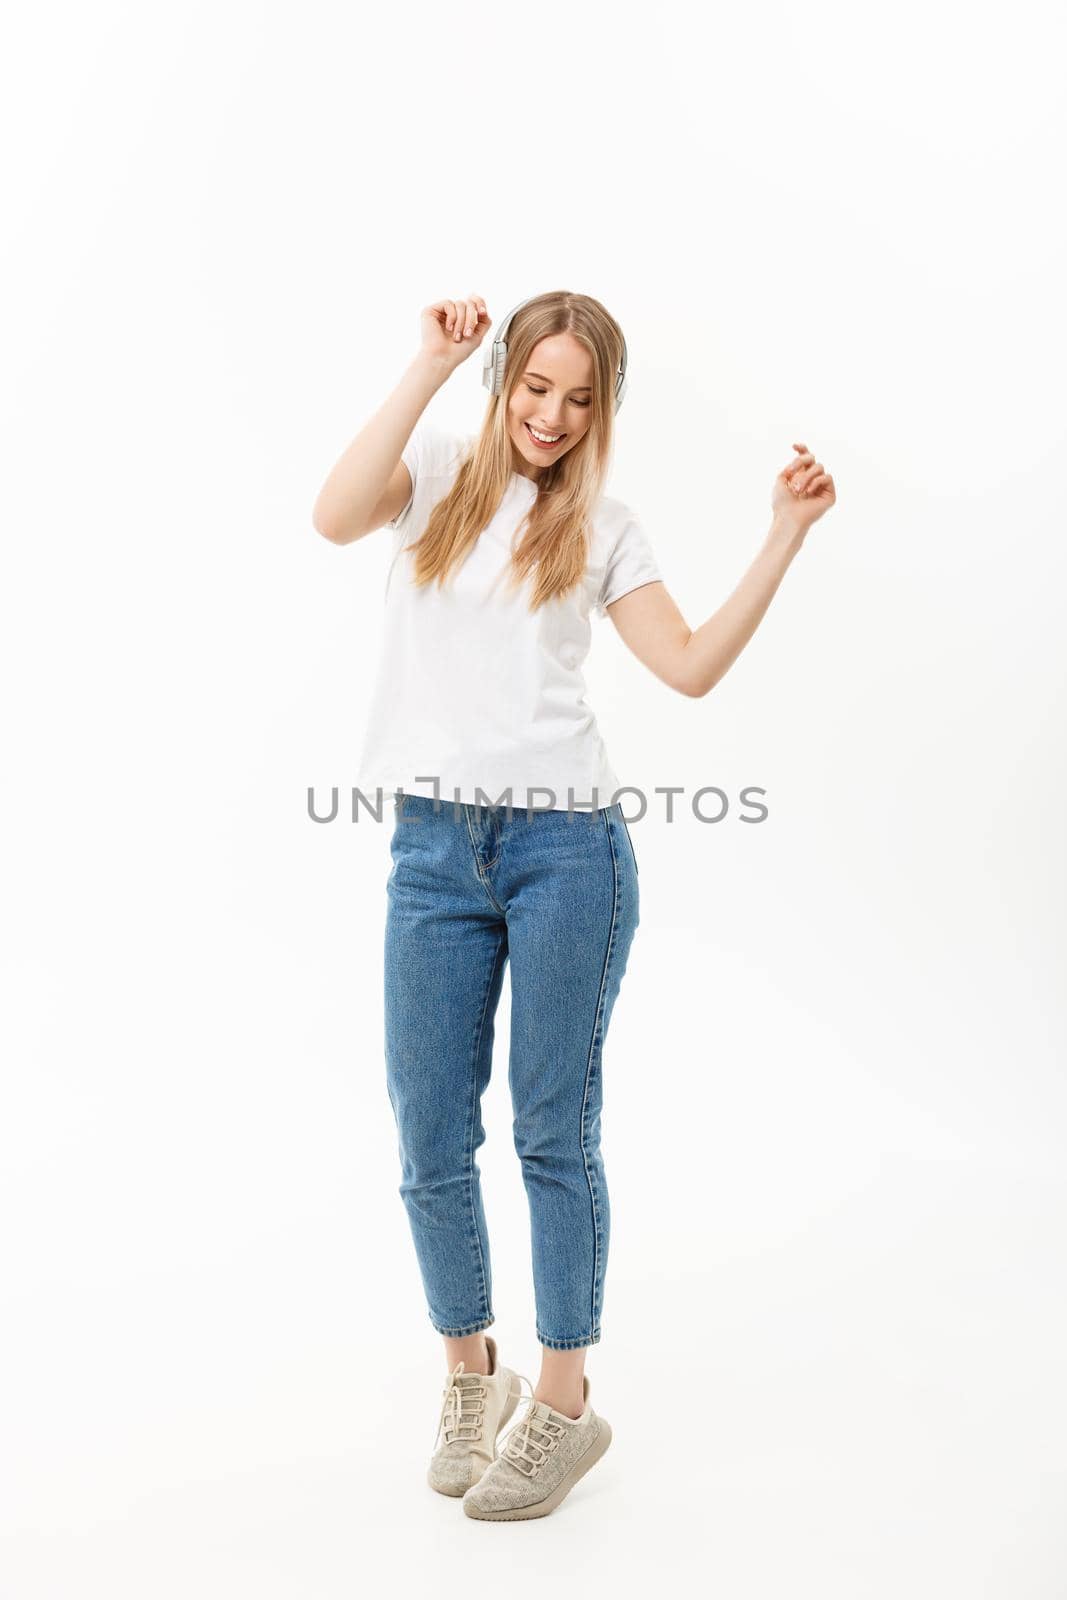 Lifestyle Concept: Portrait of a cheerful happy girl student listening to music with headphones while dancing isolated over white background.